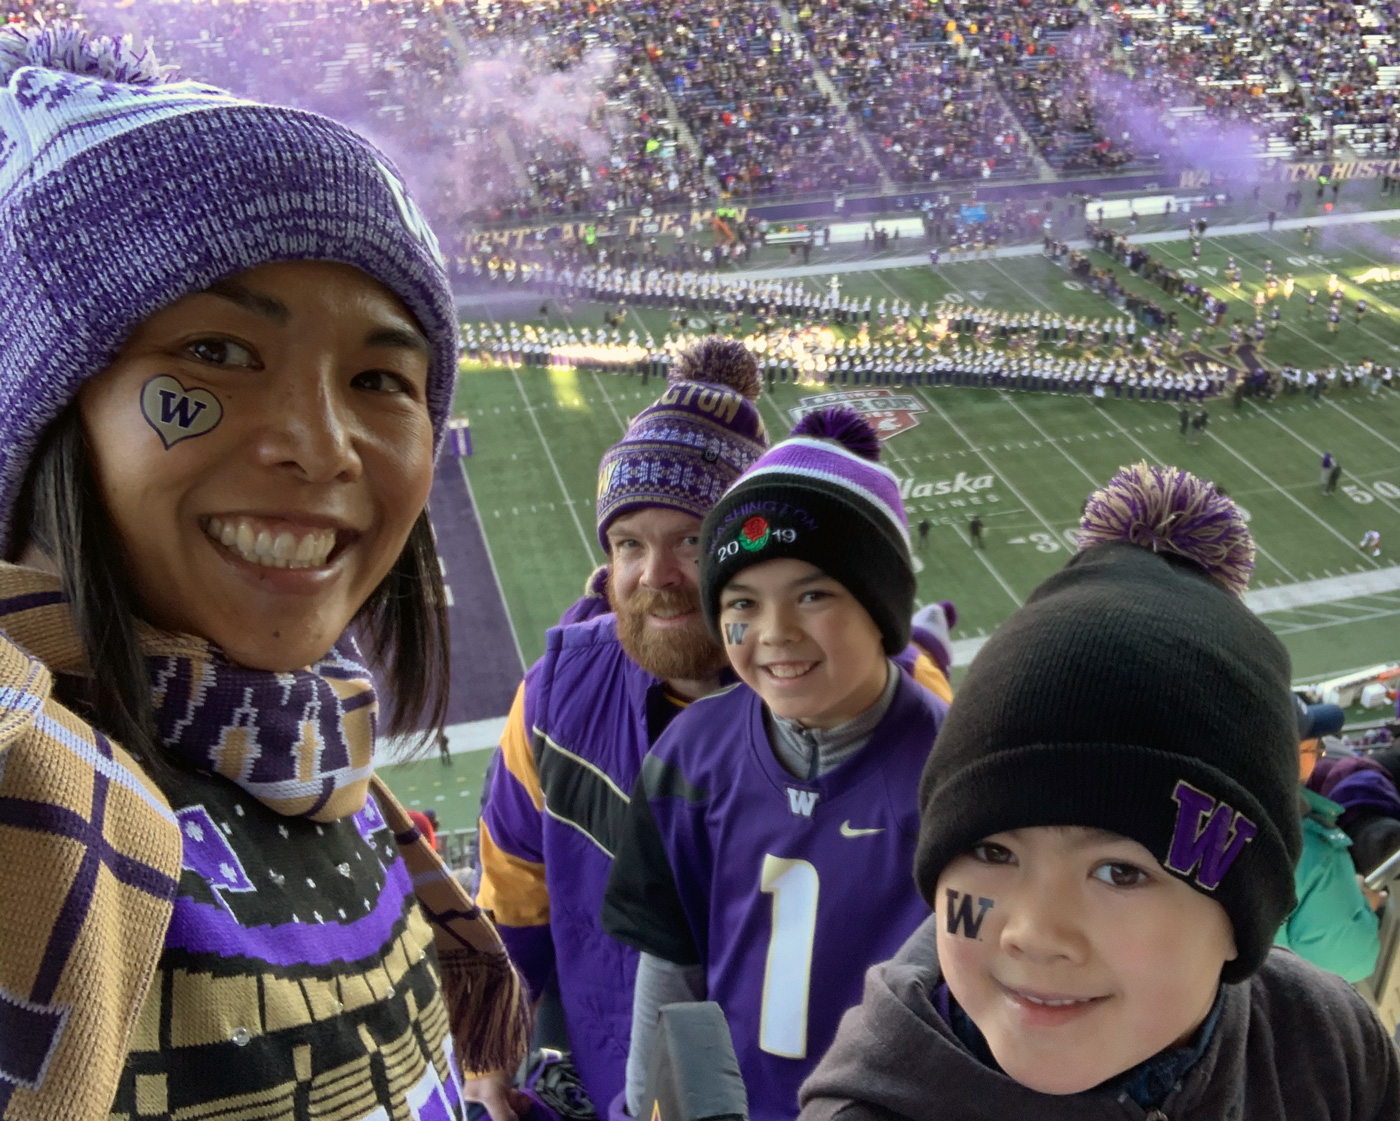 Dr. Gerrish at a Husky game with family in the stands